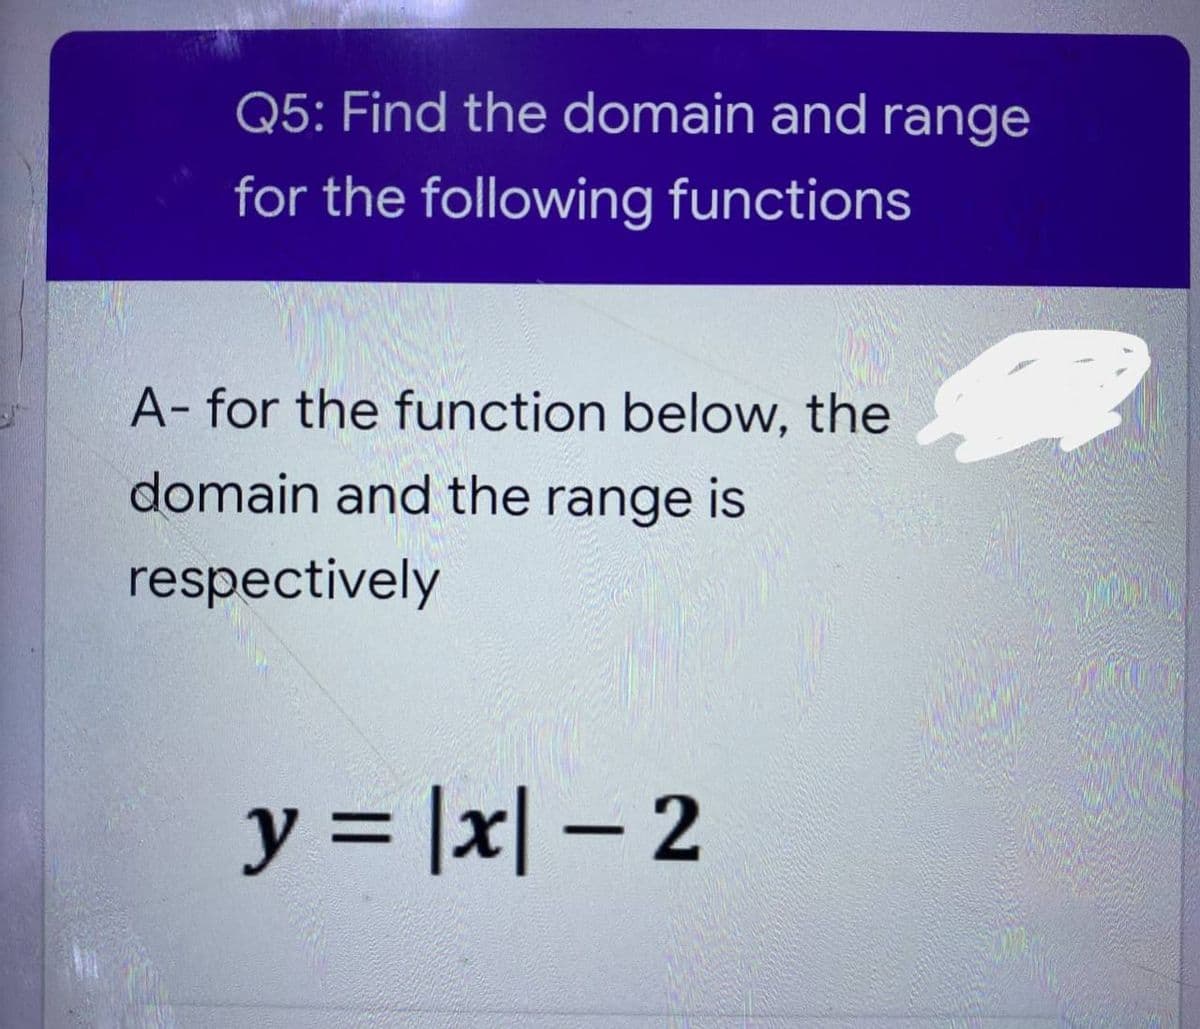 Q5: Find the domain and range
for the following functions
A- for the function below, the
domain and the range is
respectively
y = |x|- 2